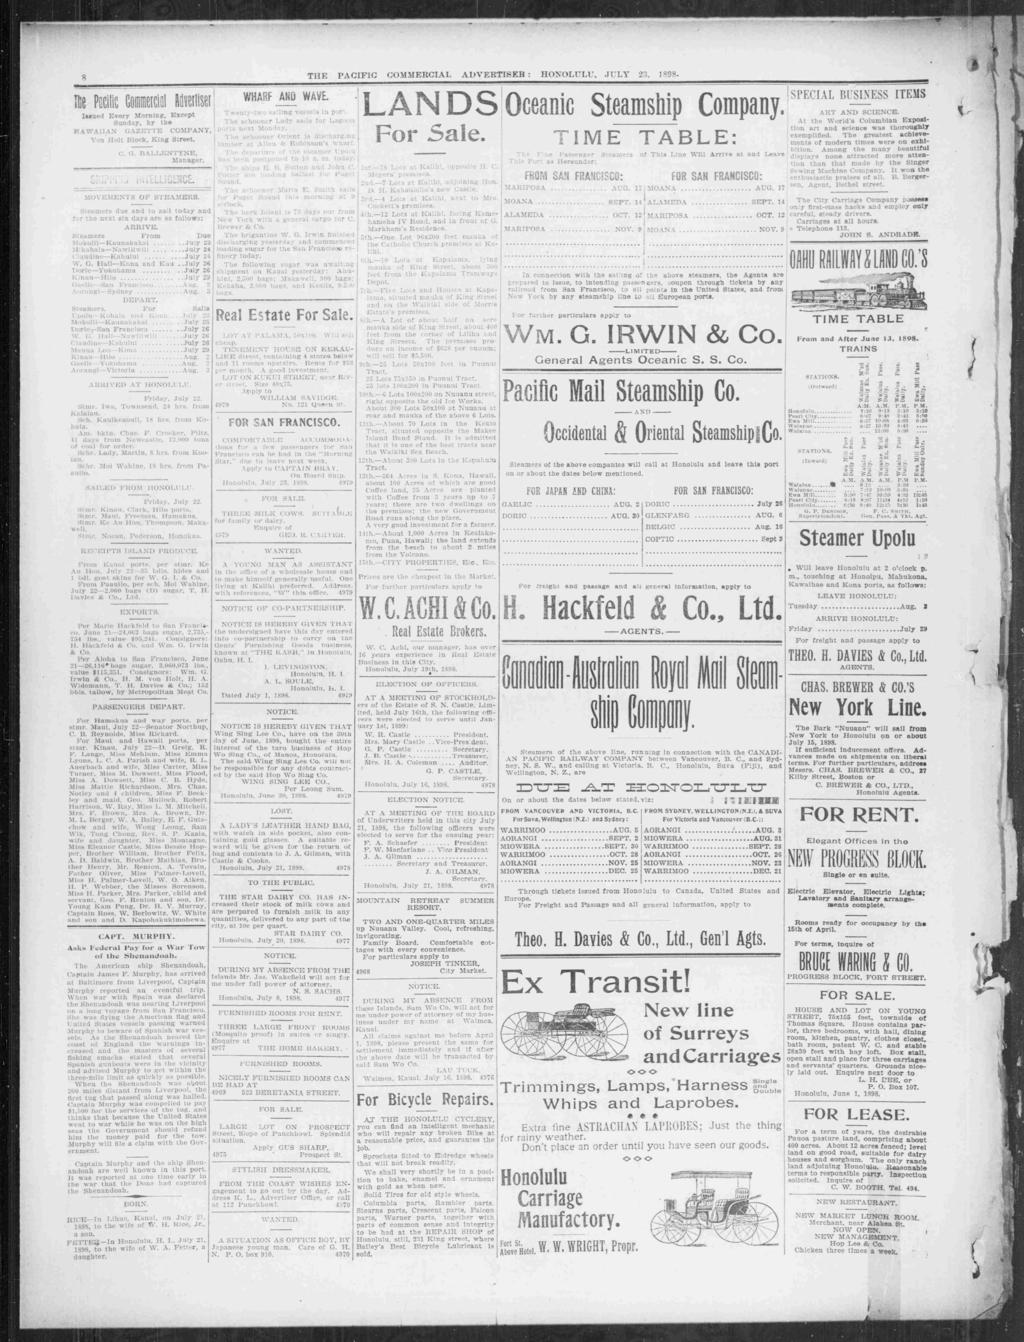 8 TE PACFC COMMERCAL ADERTSER: HONOLULU, ULY 2, S9S ssued Evey Mg, Excep Suday, by he AWAHAN GAZETTE COMPANY, Yll Blck, Kg See C O PALLLNTYNE, Maage MOEMENTS OF STEAMERS Seaes due ad sal day ad he ex